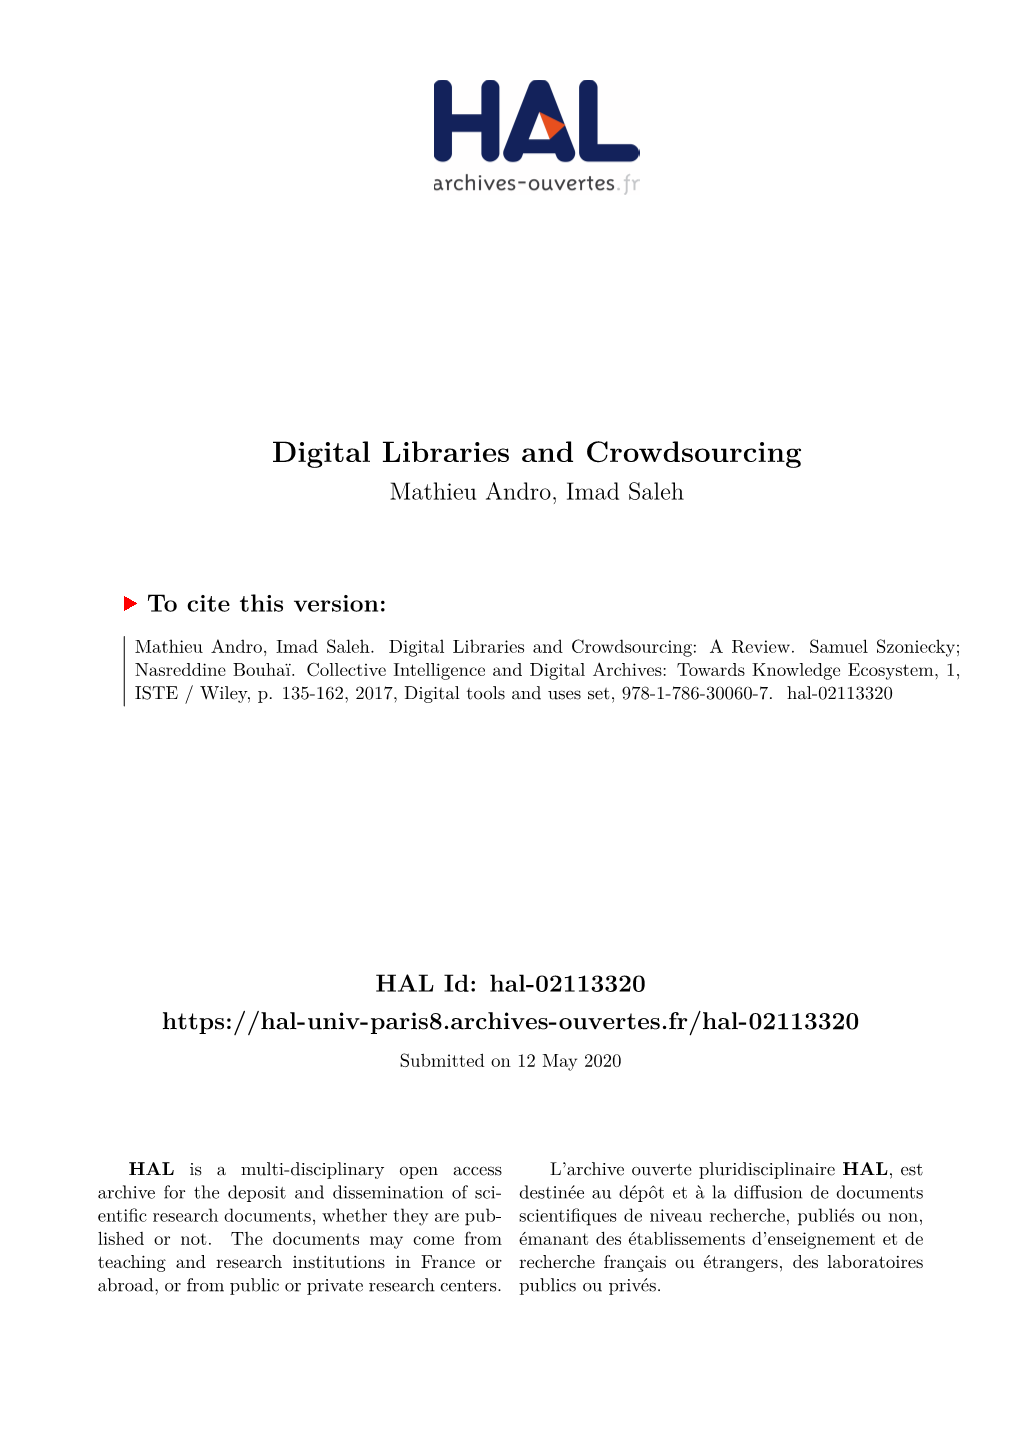 Digital Libraries and Crowdsourcing Mathieu Andro, Imad Saleh